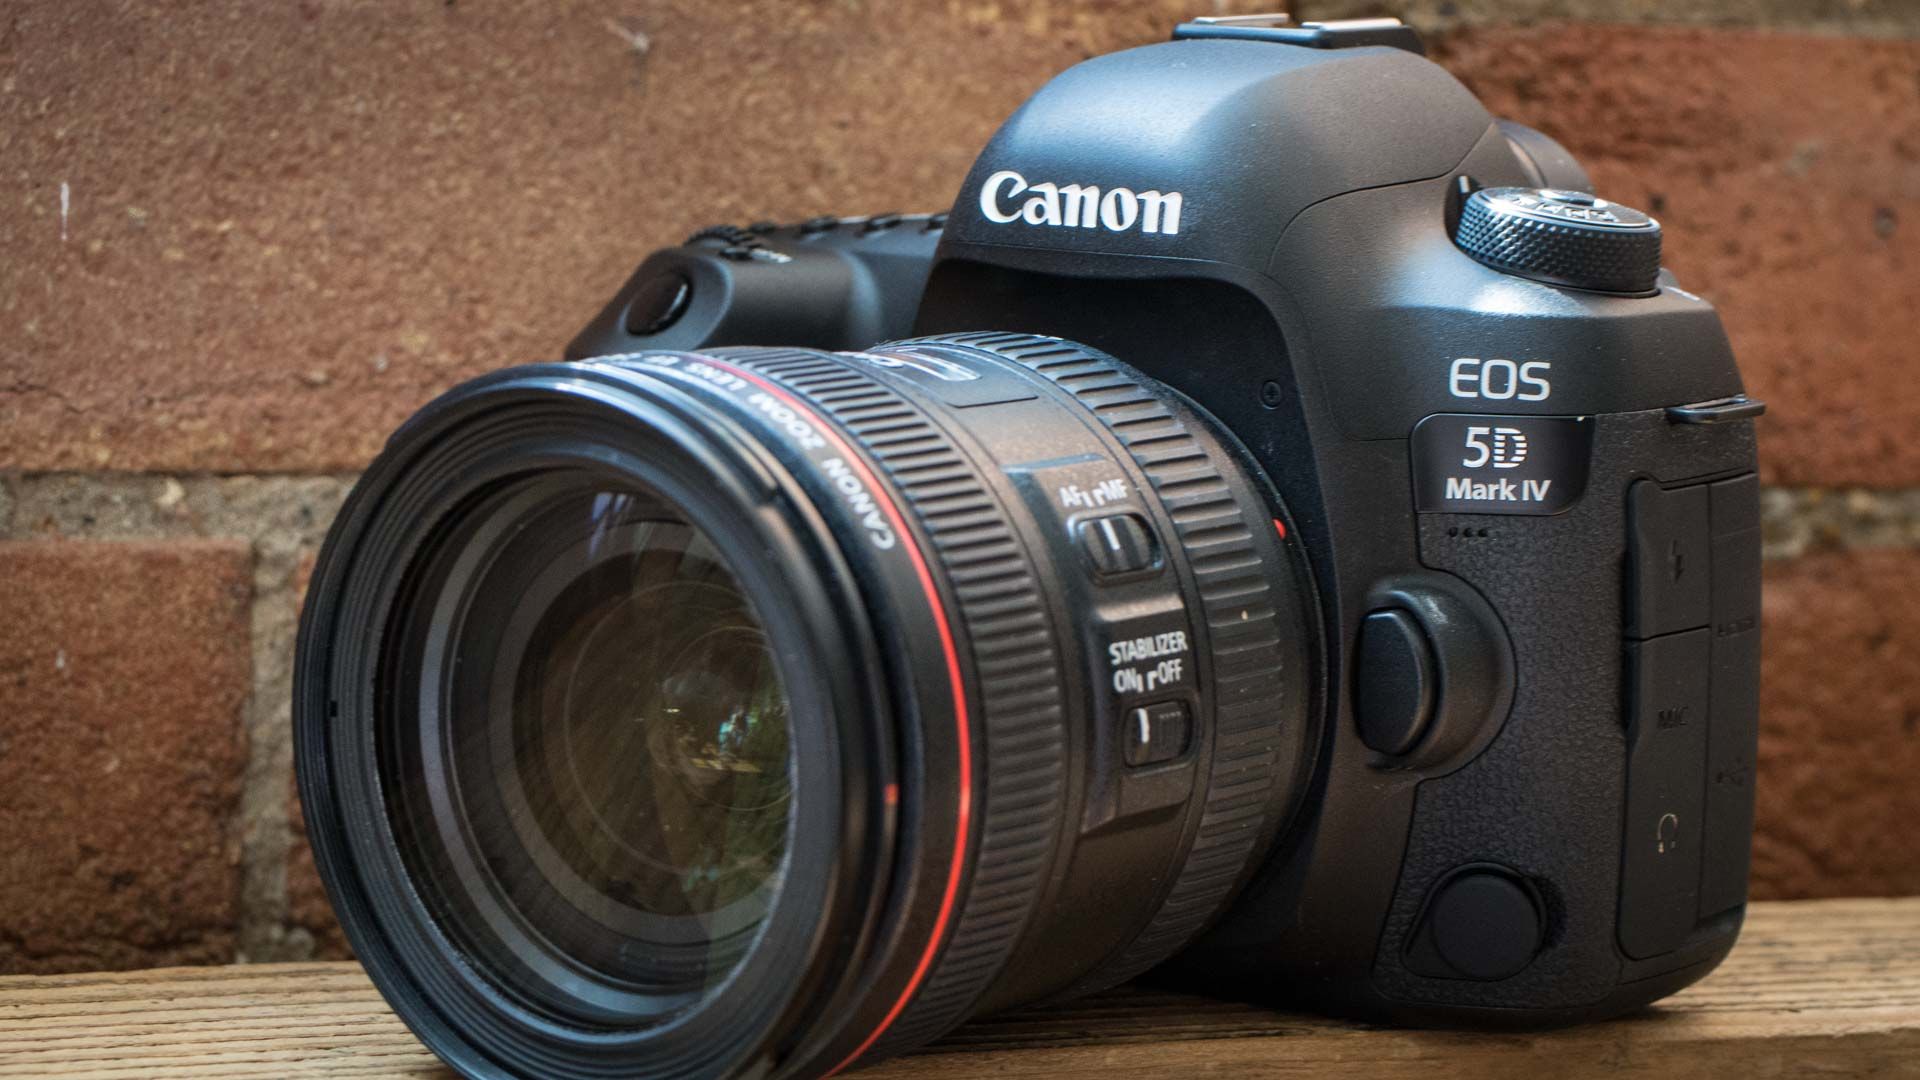 Hands On With The Canon EOS 5D Mark IV